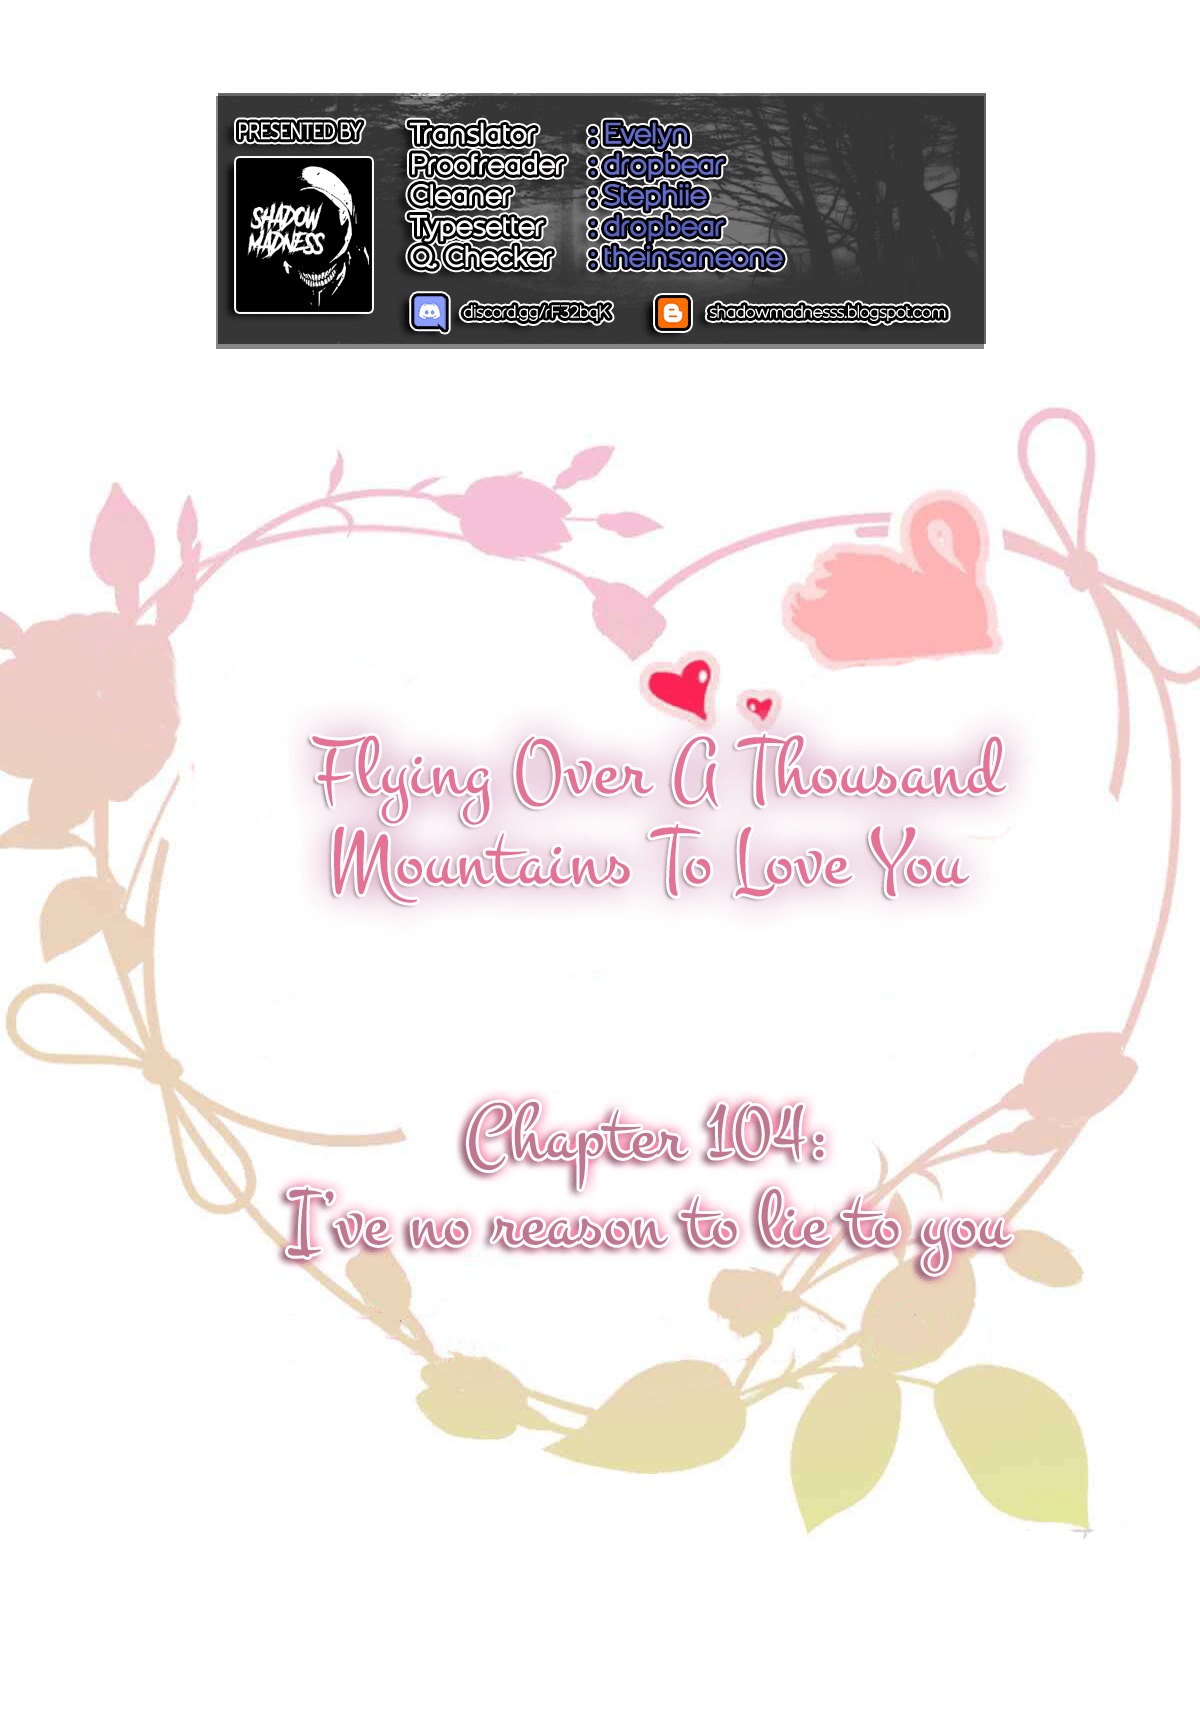 Flying Over a Thousand Mountains to Love You ch.104